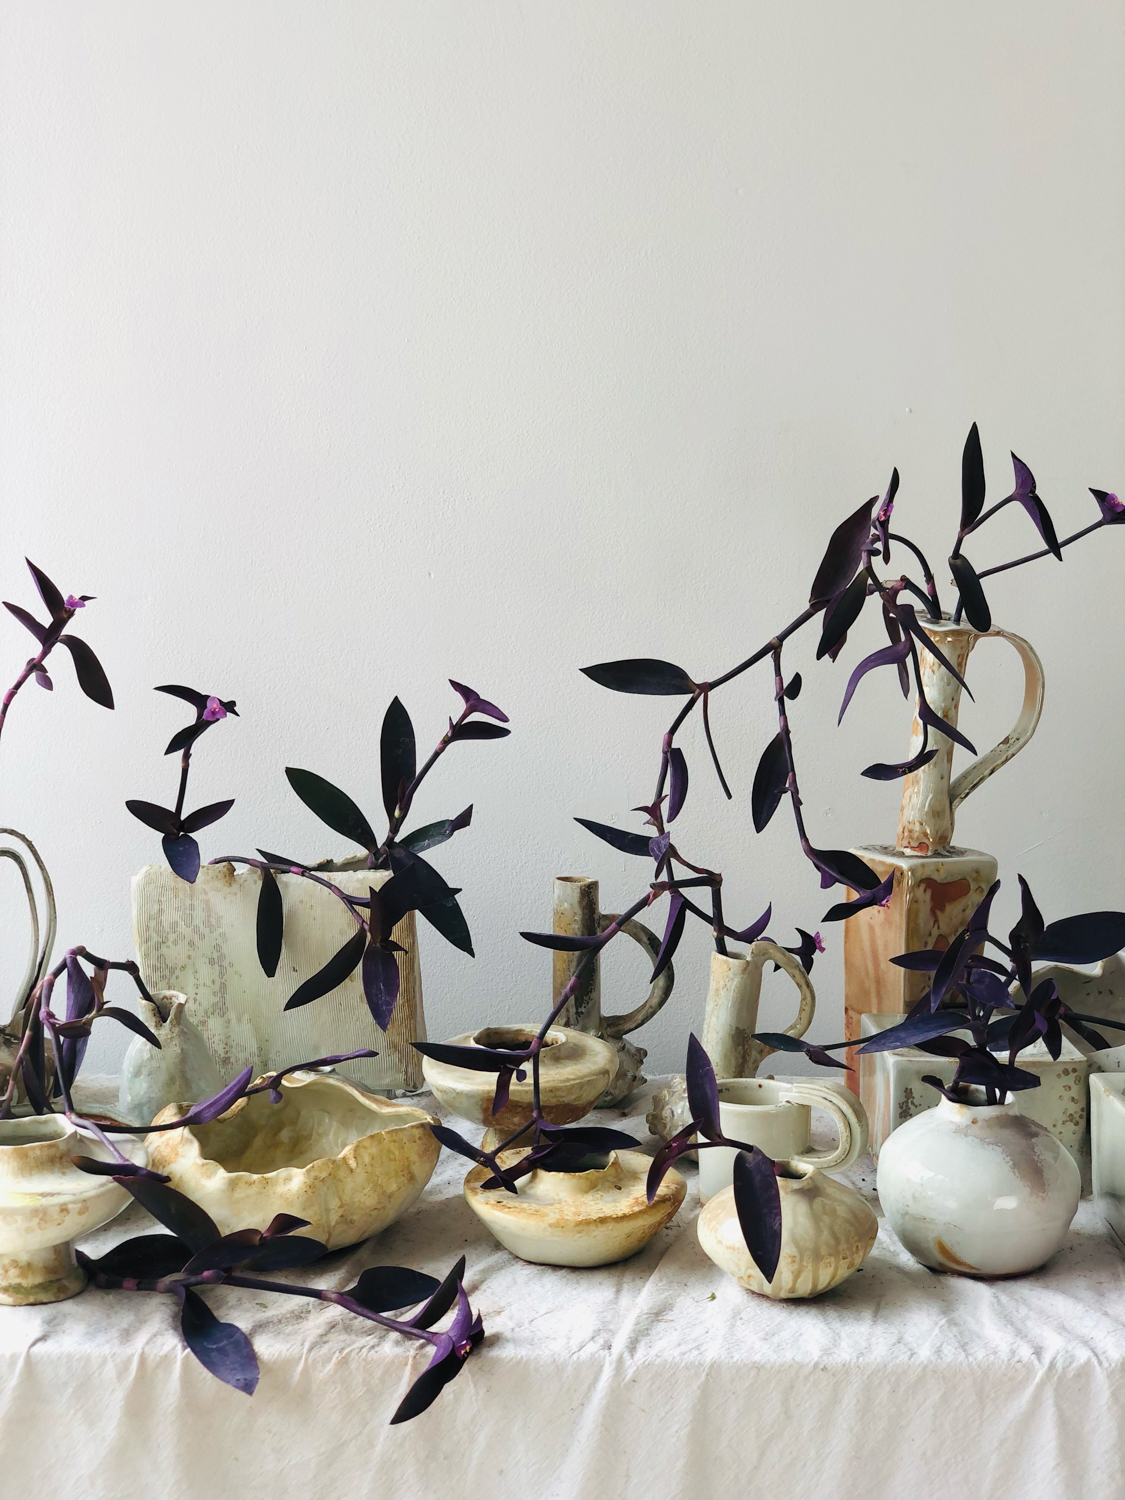 Floral installation with purple vines in white-ceramic pots